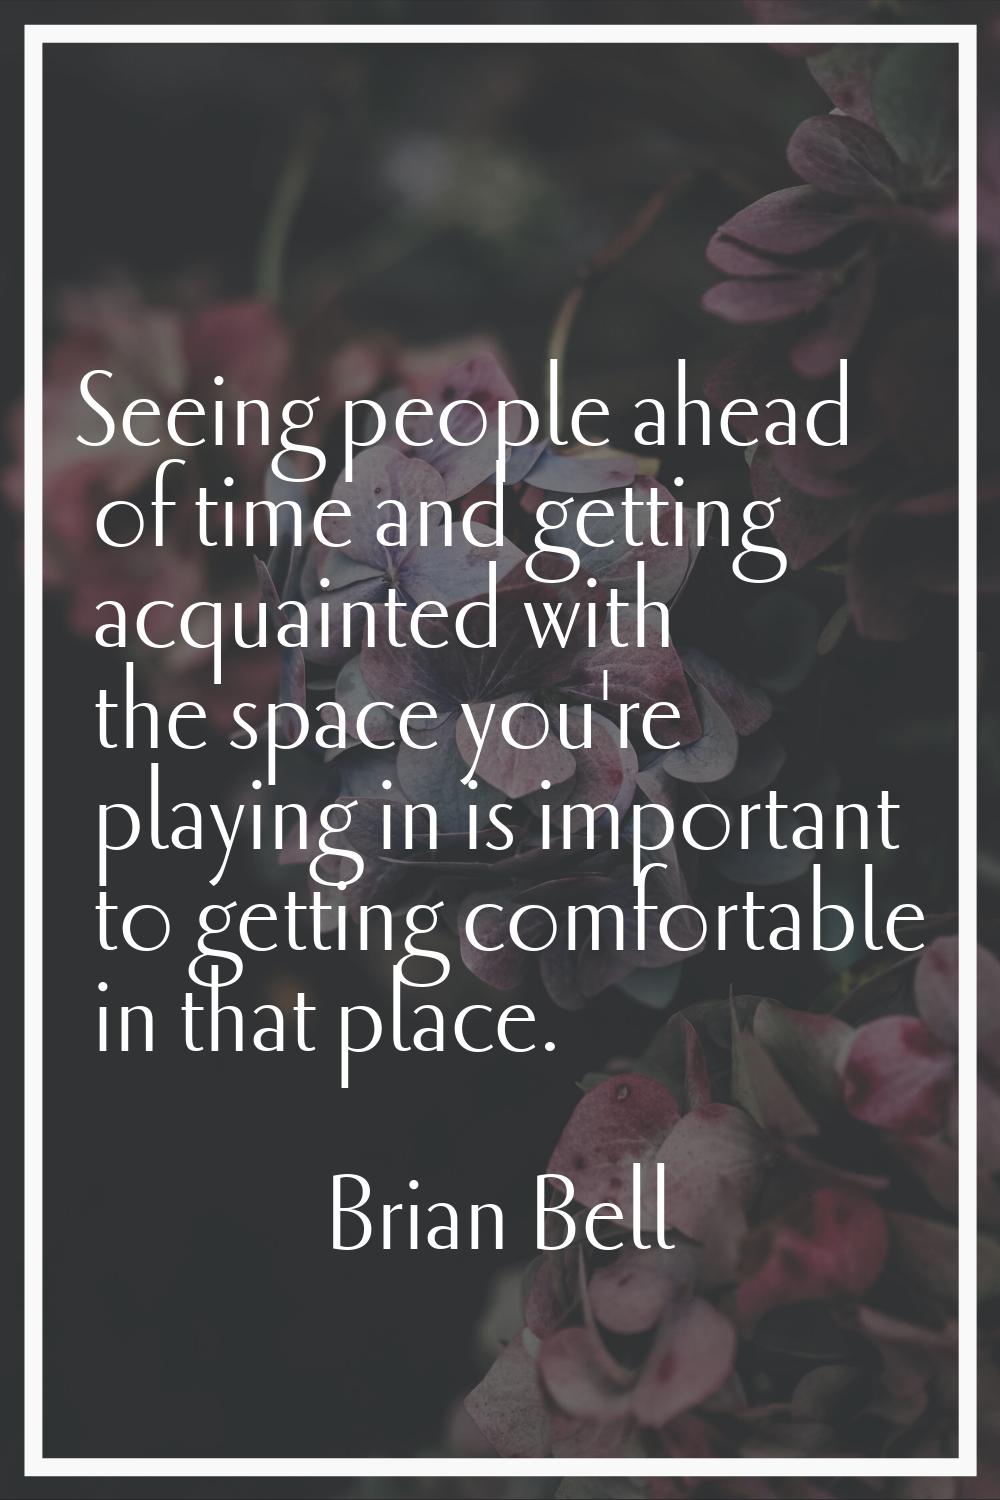 Seeing people ahead of time and getting acquainted with the space you're playing in is important to